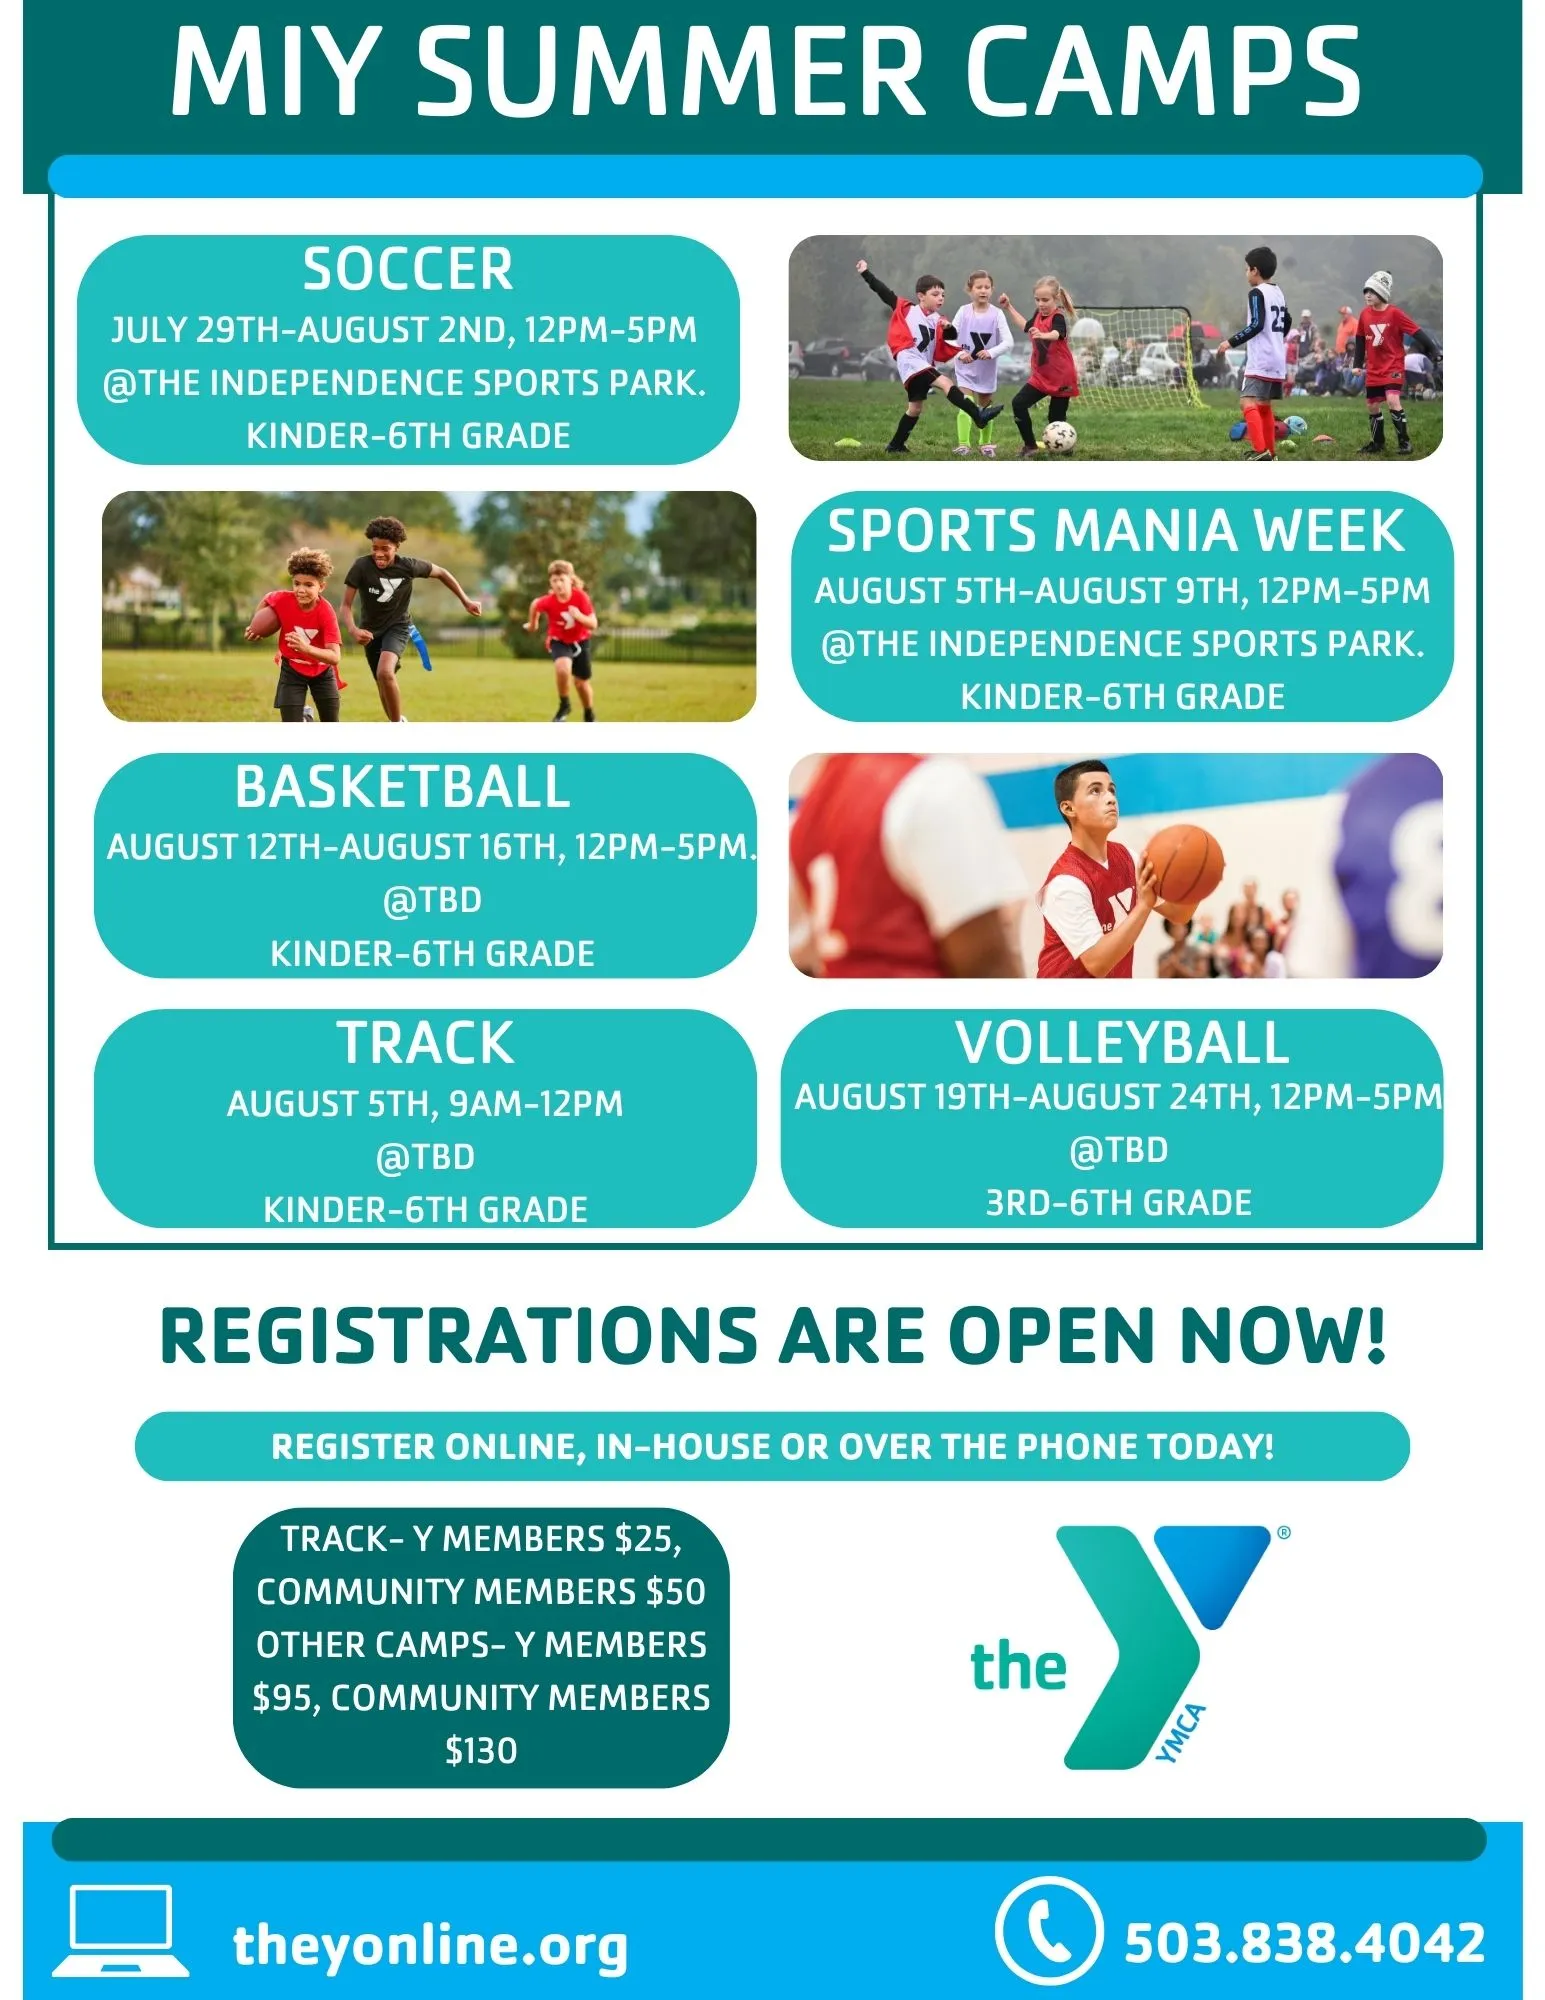 MIY Summer Sports Camps